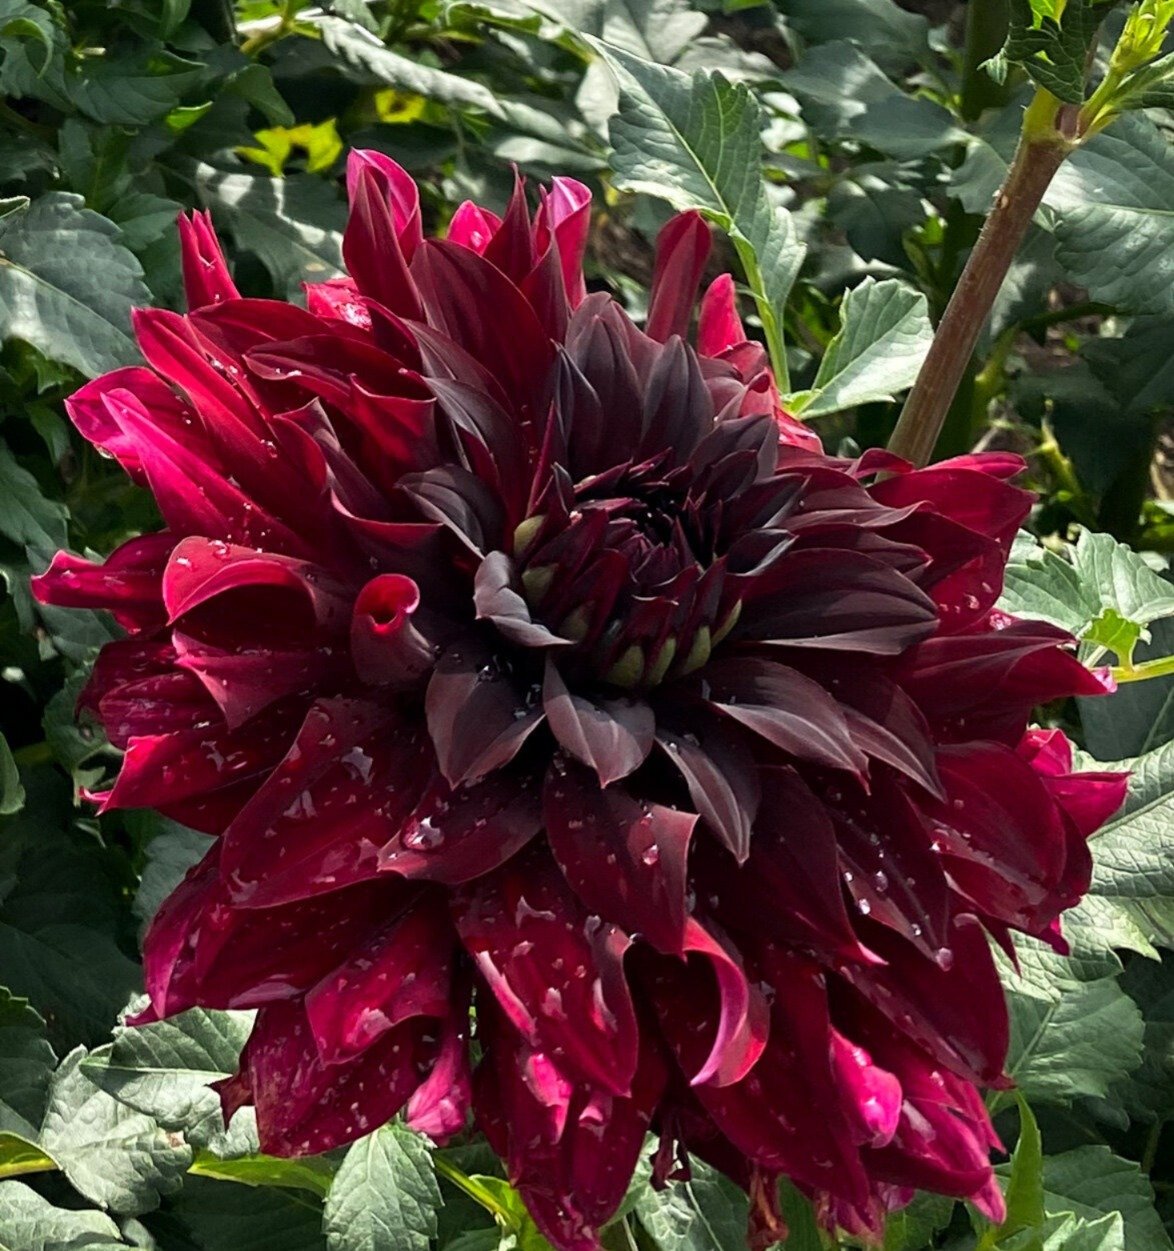 Black Fawn Dahlia Flower: A unique black and white dahlia with intricate petal patterns, blooming beautifully in a garden.